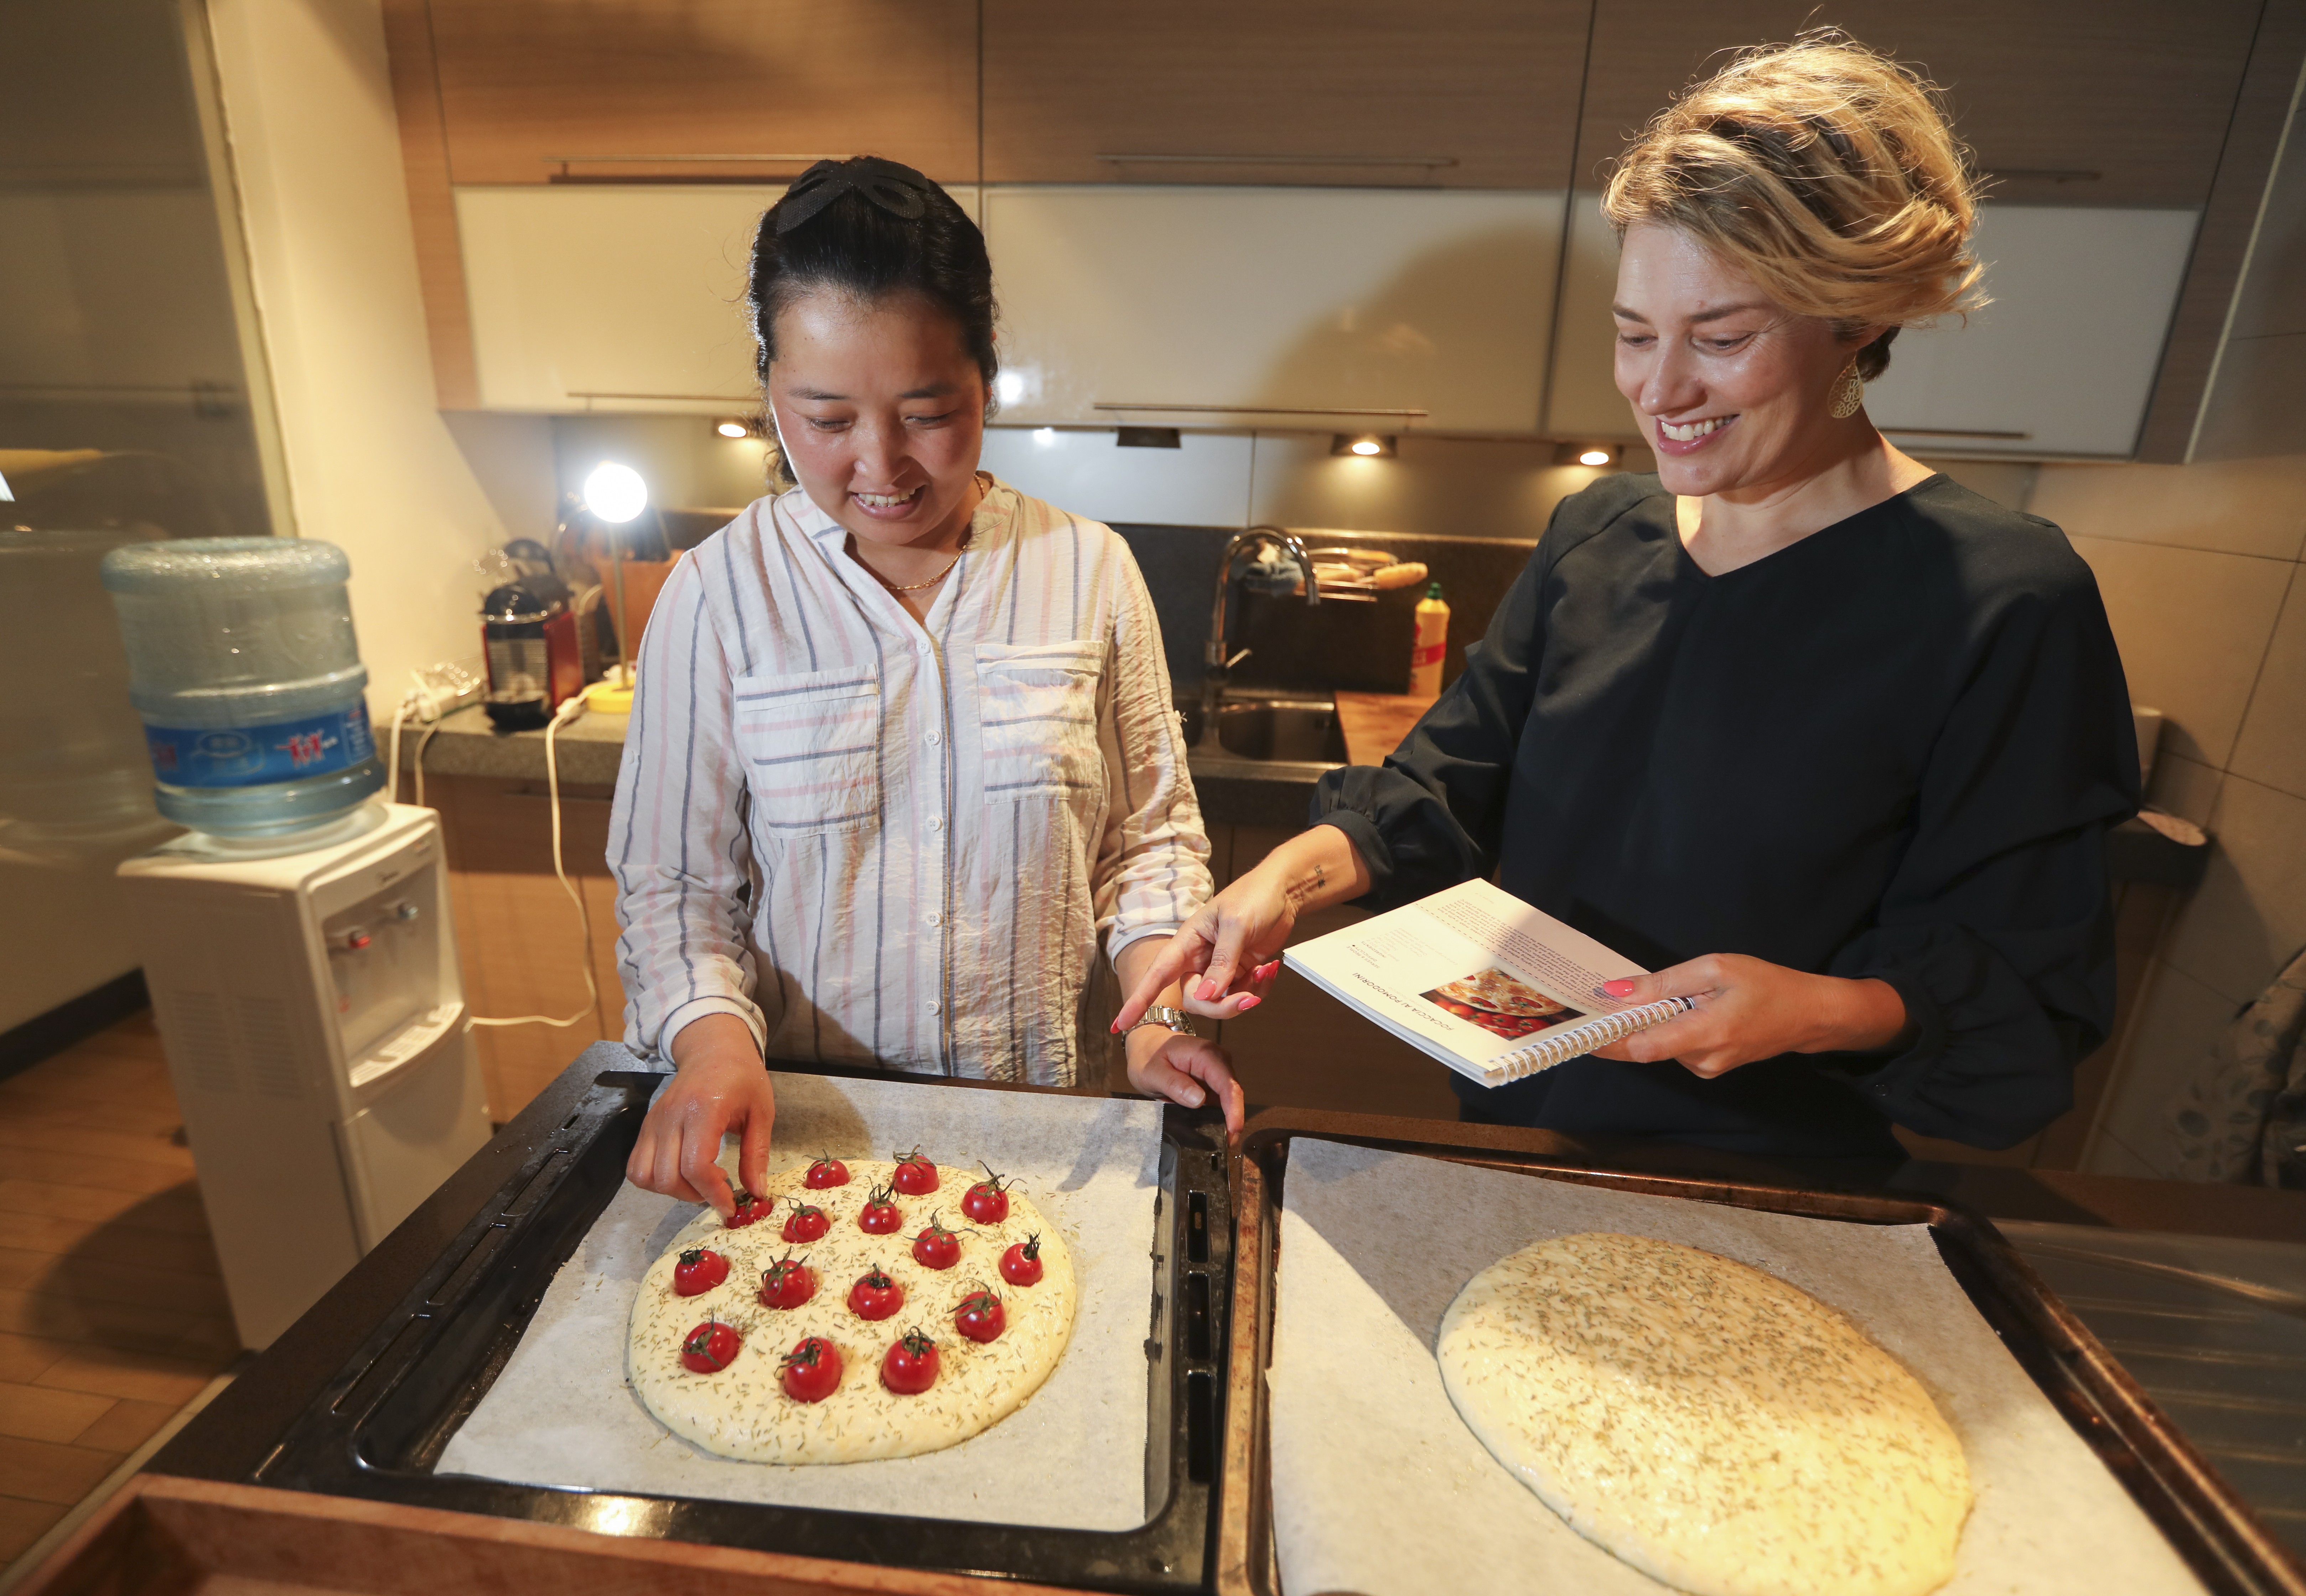 Beijing expat Lise Floris with her ayi Zhang Ting as she cooks focaccia ai pomodorini, or focaccia made with potatoes and cherry tomatoes – a special Italian dish. Photo: Simon Song